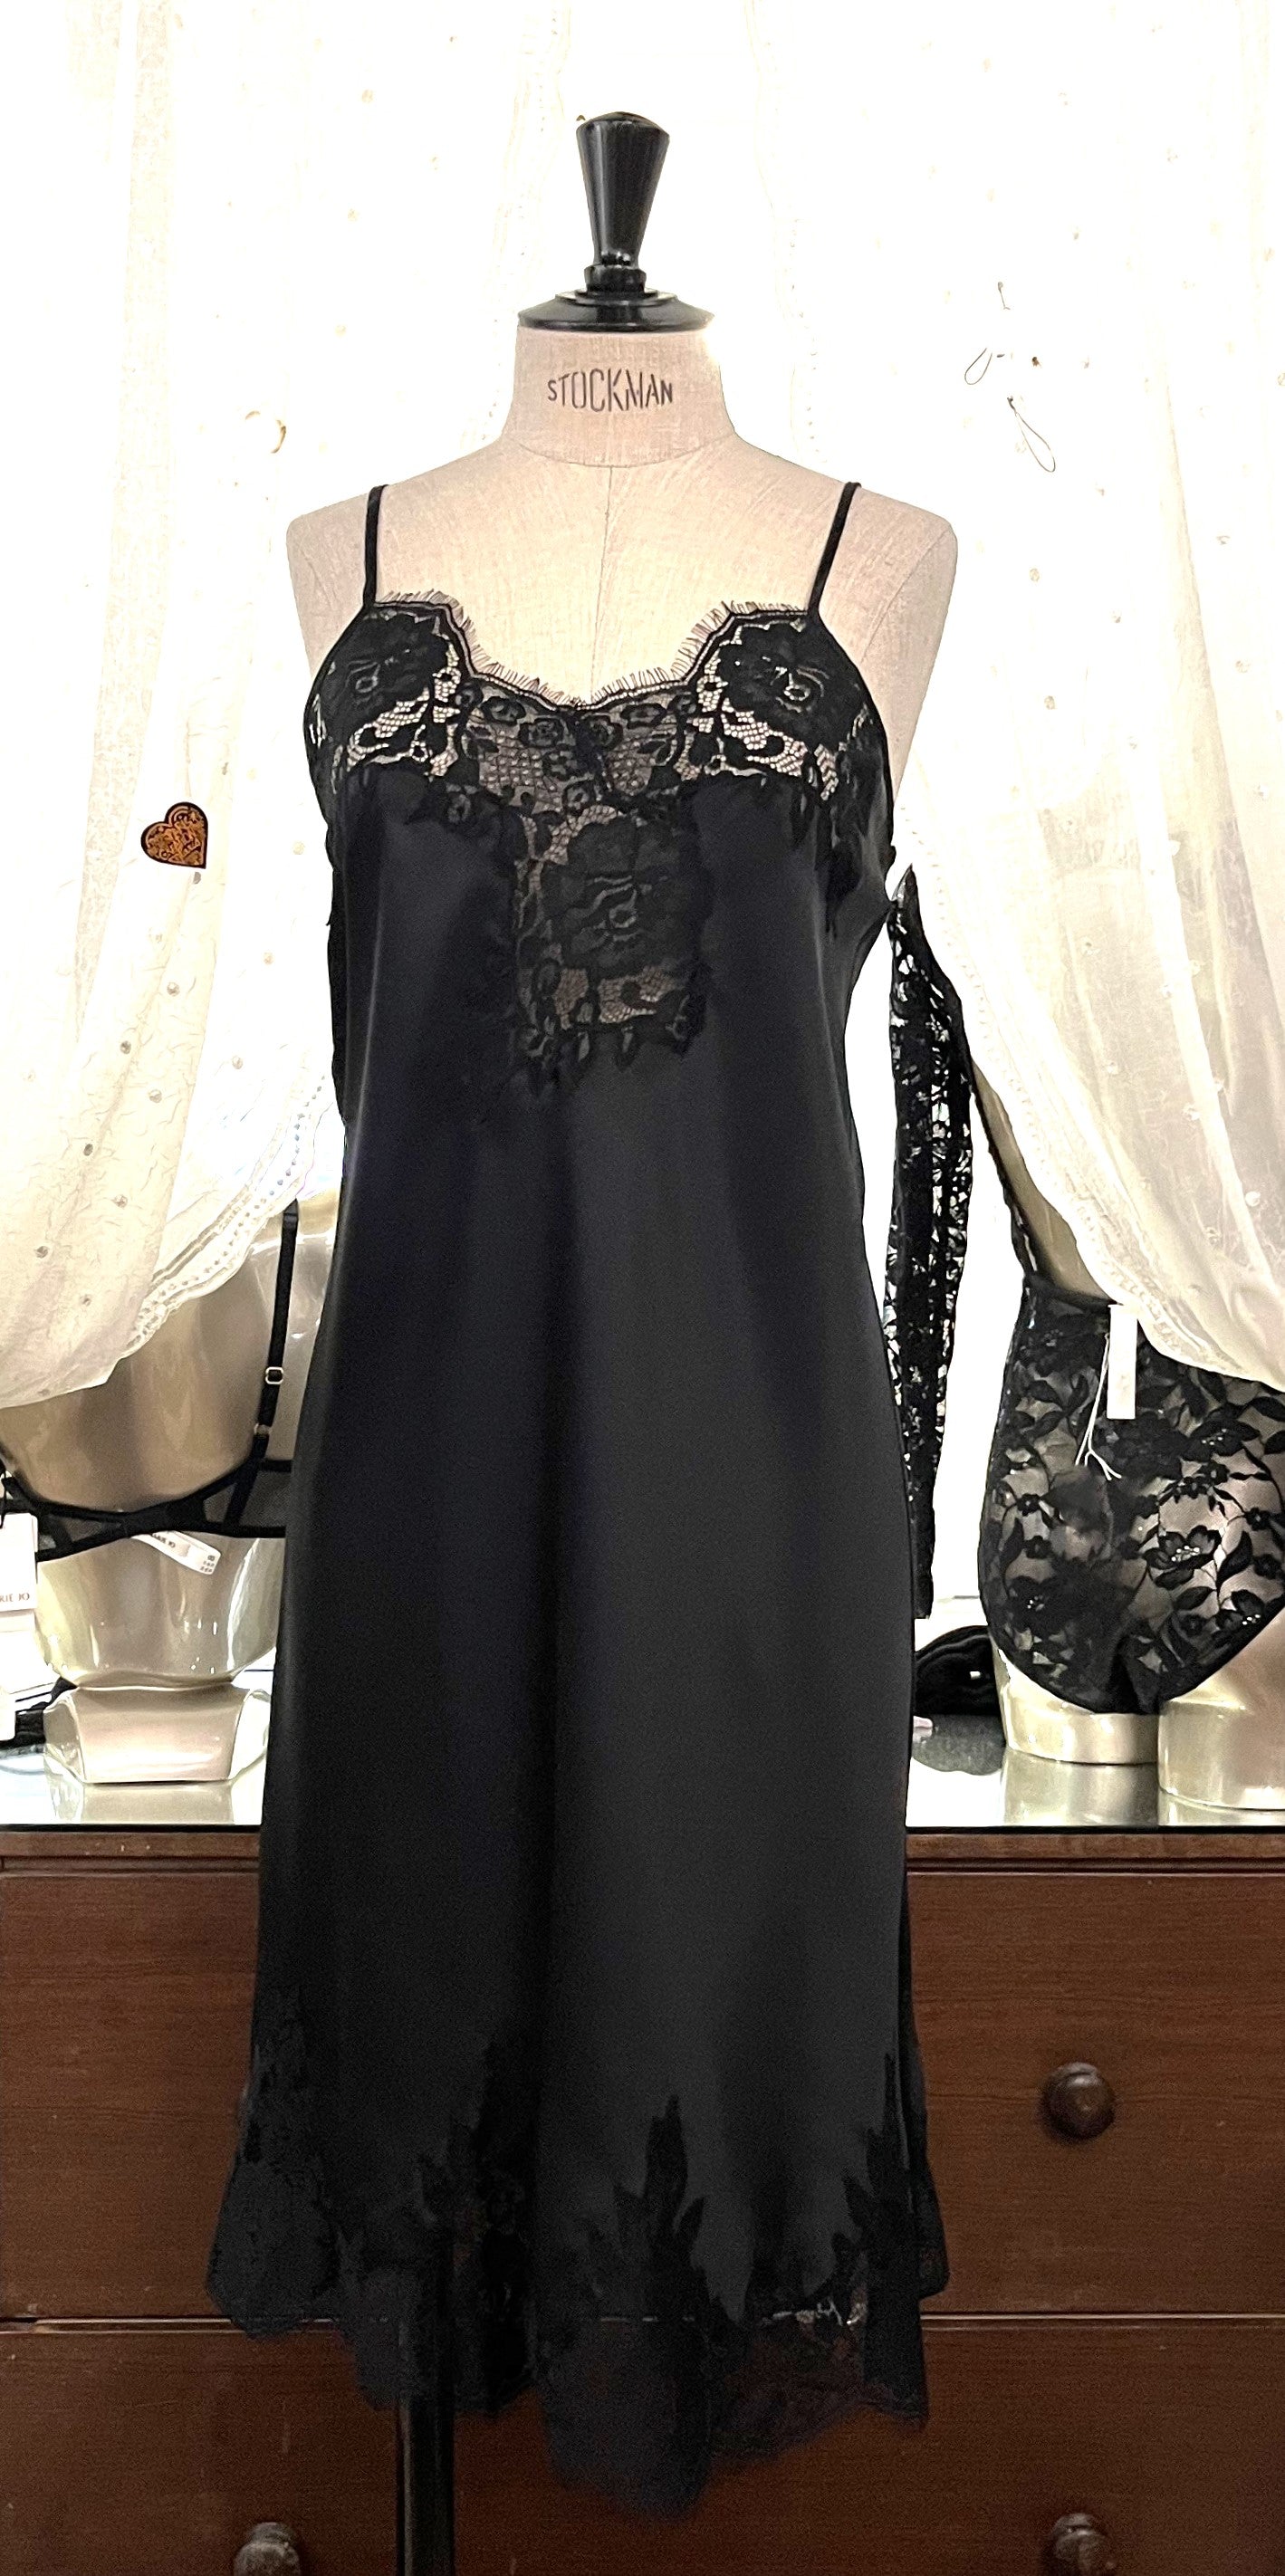 Black/Black. Made in Italy, this is a beautiful long pure silk satin night/slip. There is stunning deep appliqué lace at the bust and hem. There are French seams throughout for softness. The fine spaghetti straps are adjustable for the perfect fit. This nightslip is cut on the bias and panelled giving lovely flare and movement. Perfect for bed or daywear. May be worn as underwear, nightwear or outerwear.   Composition: 100% Silk Satin Italian Lace 100% polyamide Machine washable Length 82cm from nape.